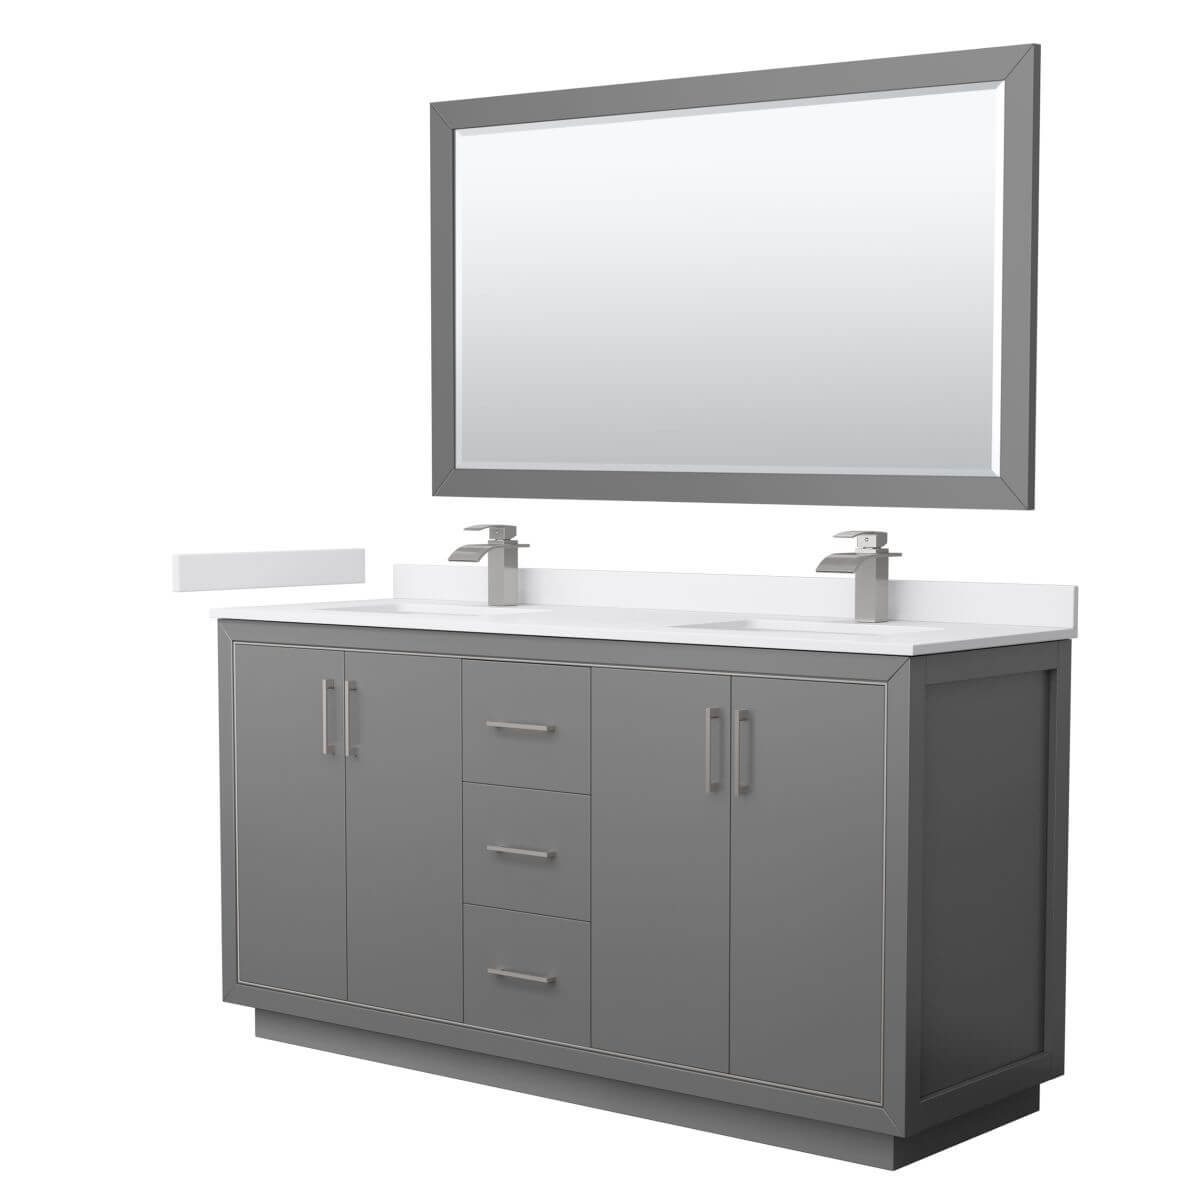 Wyndham Collection WCF111166DKGWCUNSM58 Icon 66 inch Double Bathroom Vanity in Dark Gray with White Cultured Marble Countertop, Undermount Square Sinks, Brushed Nickel Trim and 58 Inch Mirror